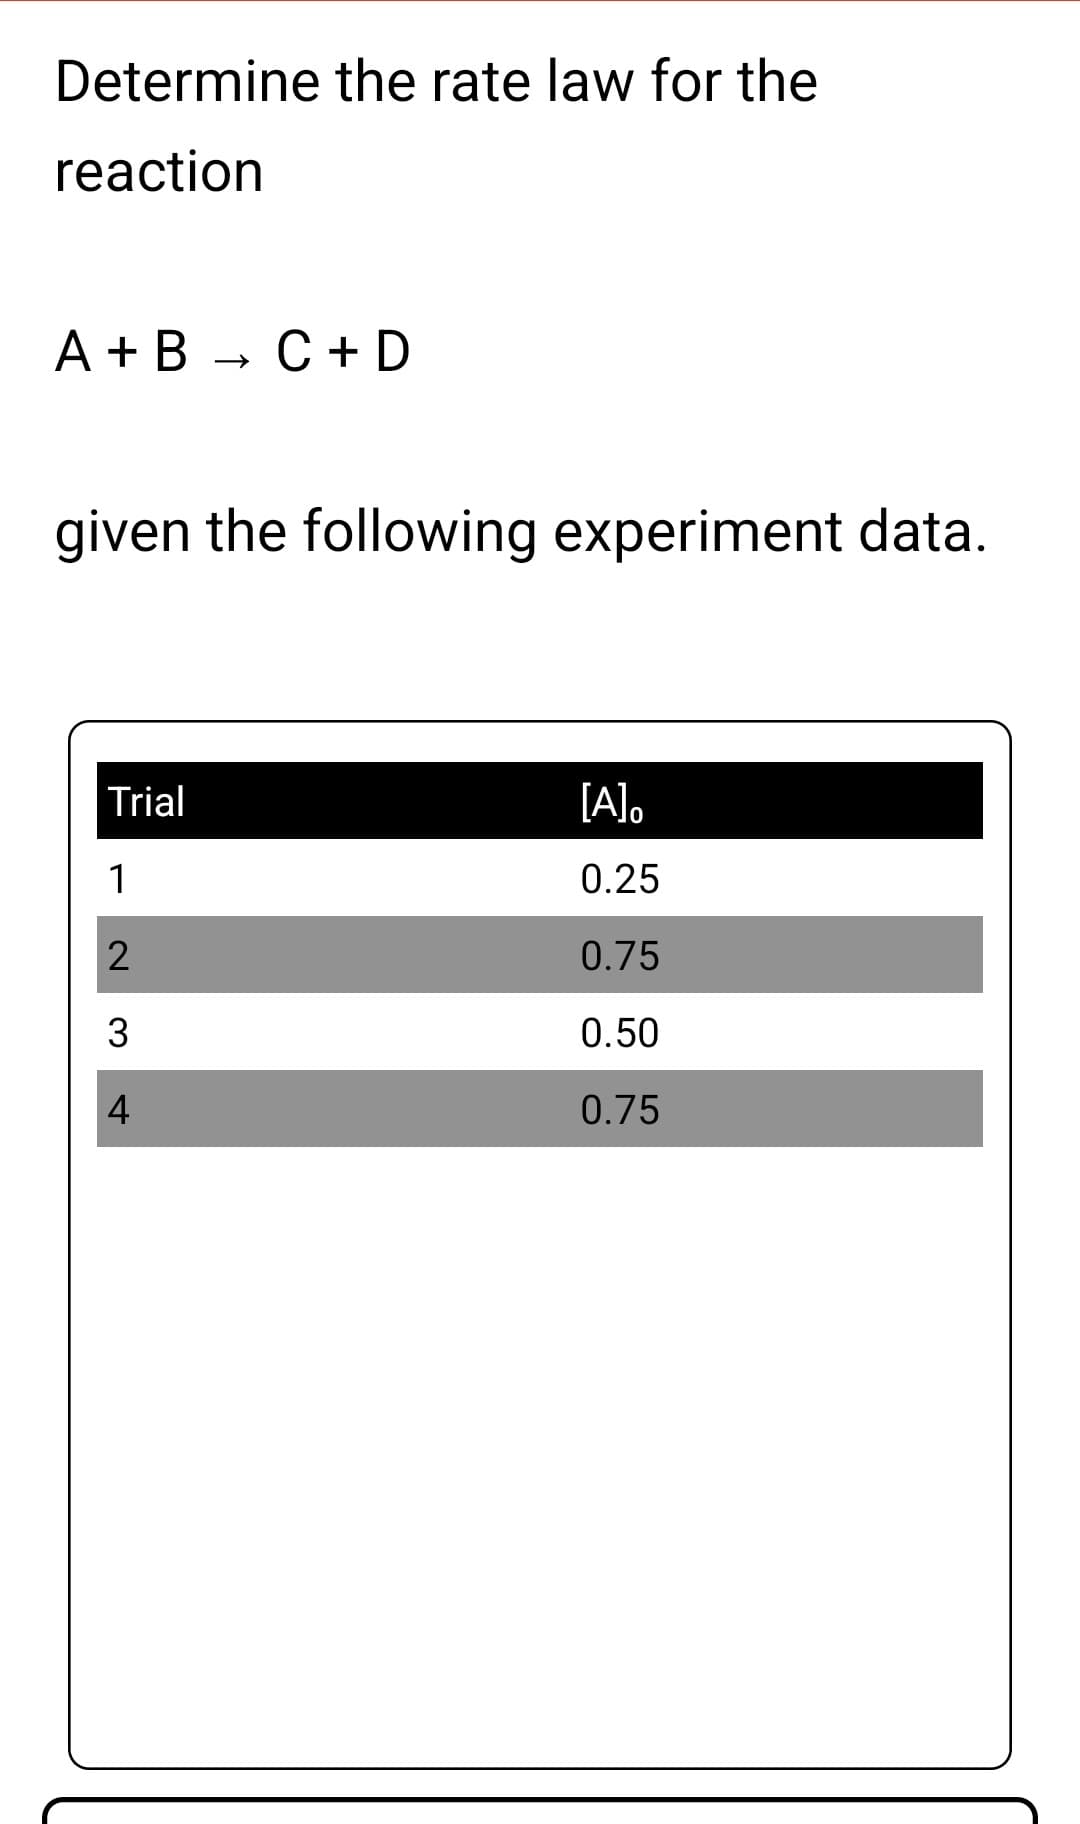 Determine the rate law for the
reaction
A + B - C+D
given the following experiment data.
Trial
[A]o
1
0.25
0.75
0.50
0.75
4.
